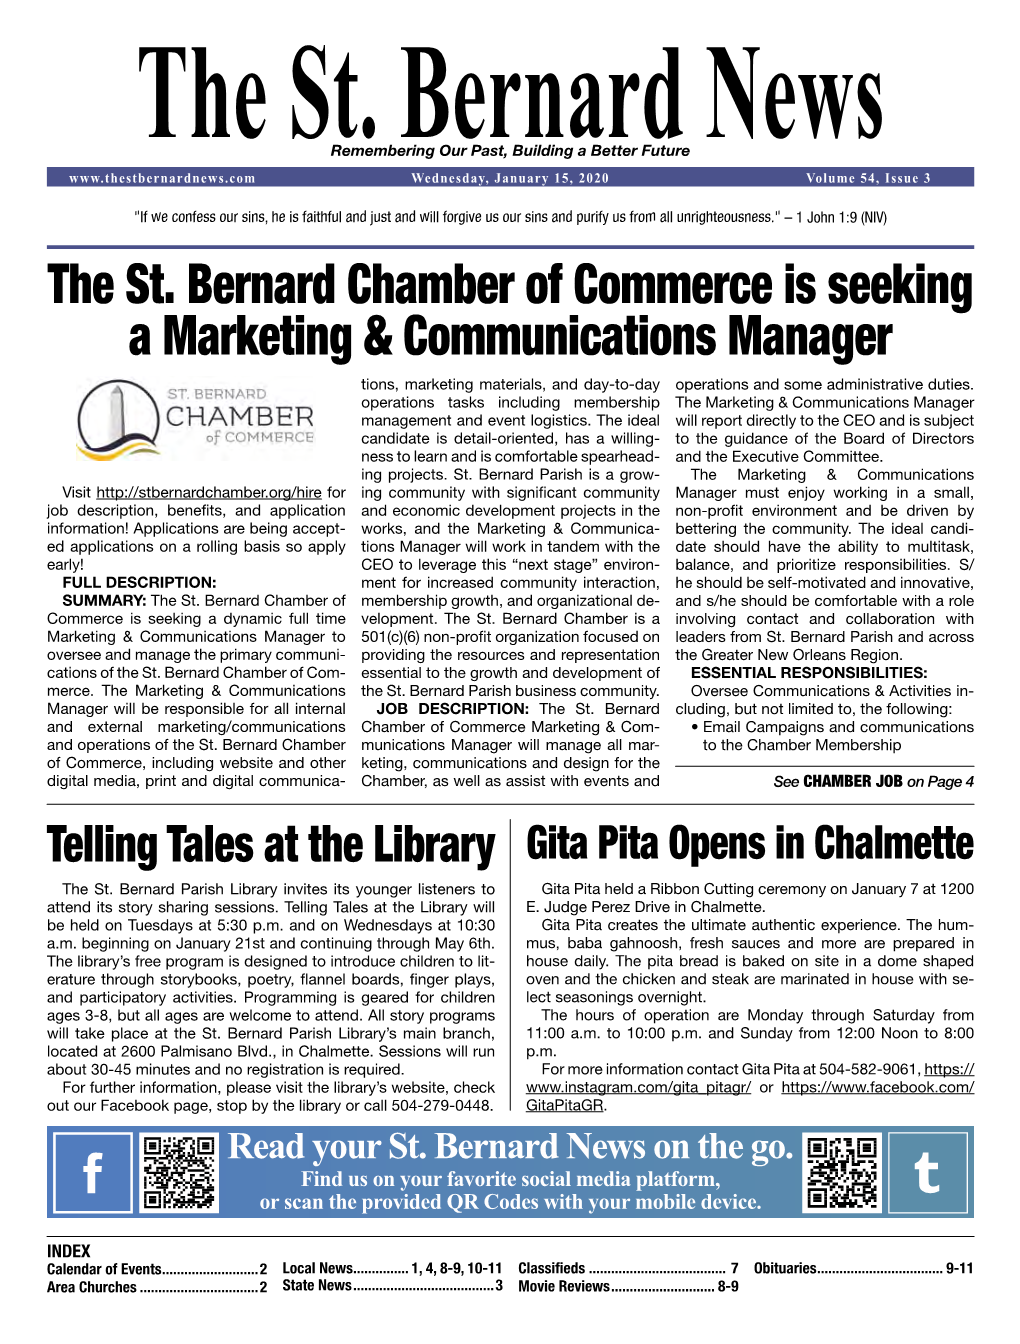 The St. Bernard Chamber of Commerce Is Seeking a Marketing & Communications Manager